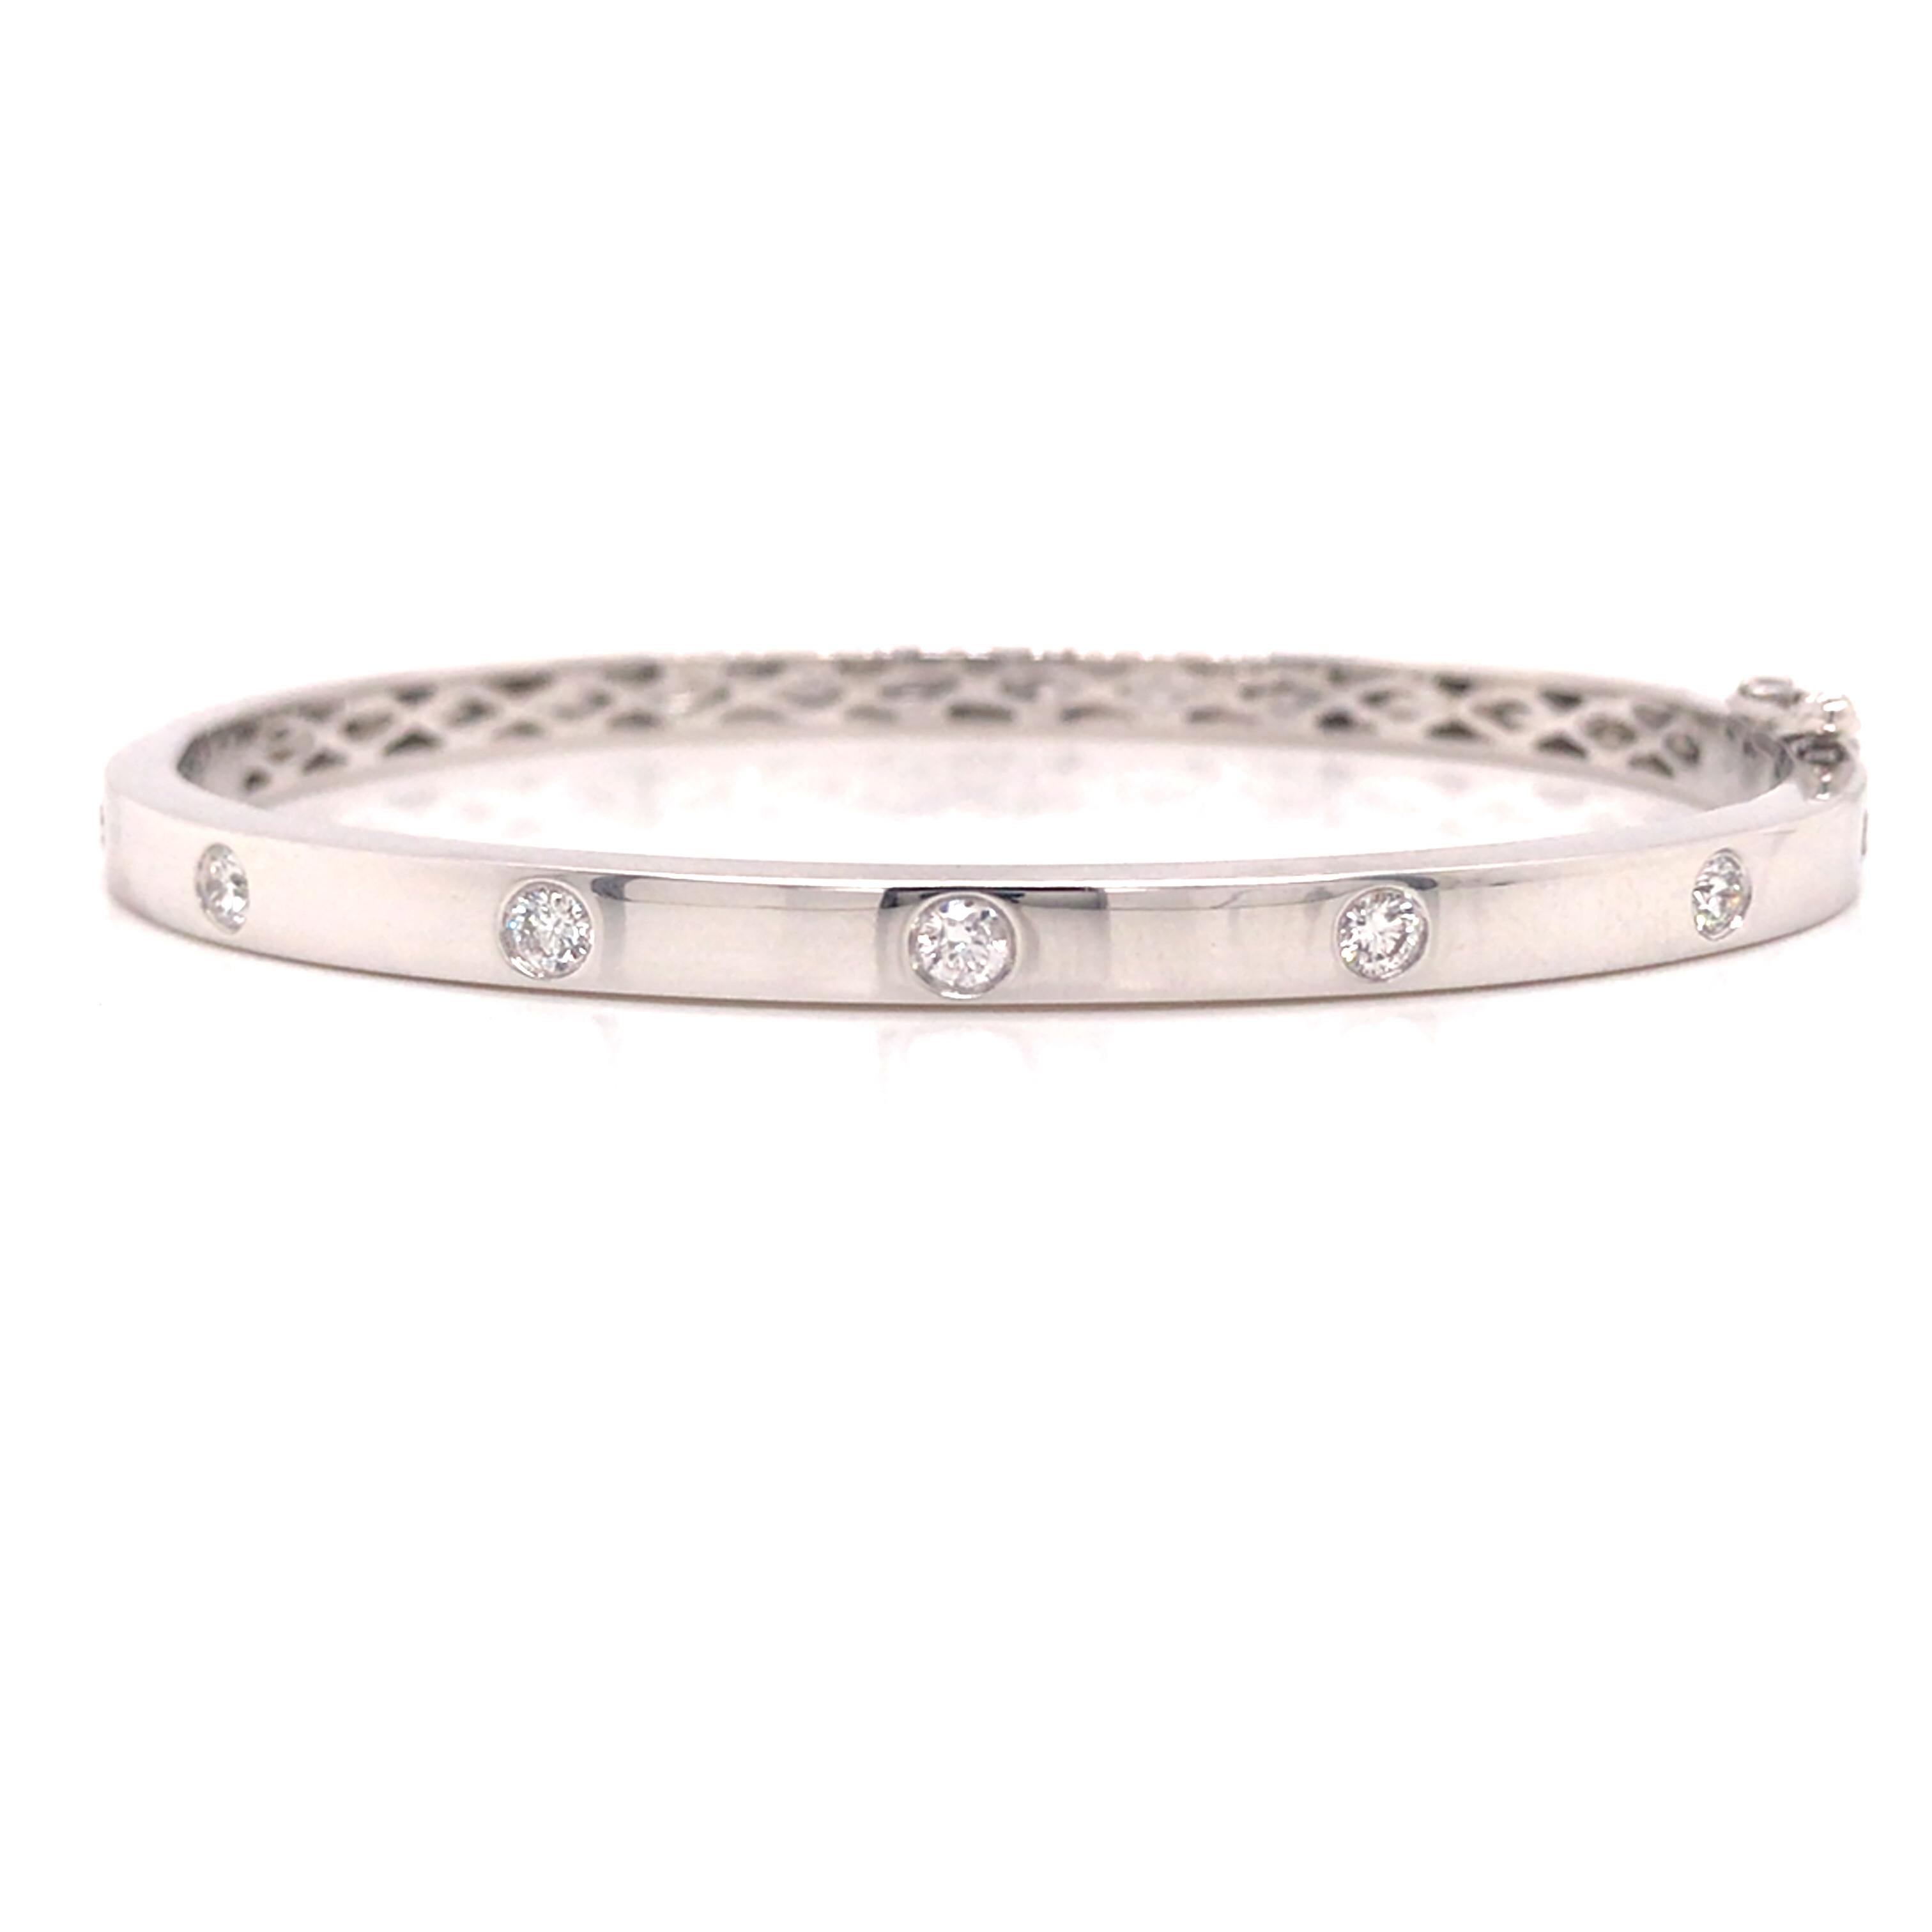 Diamond Bevel Bangle Bracelet in 14K White Gold.  (7) Round Brilliant Cut Diamonds weighing 0.45 carat total weight, G-H in color and VS-SI in clarity are expertly set.  The Bangle measures 6 1/2 inch inner circumference and 3/16 inch in width. 